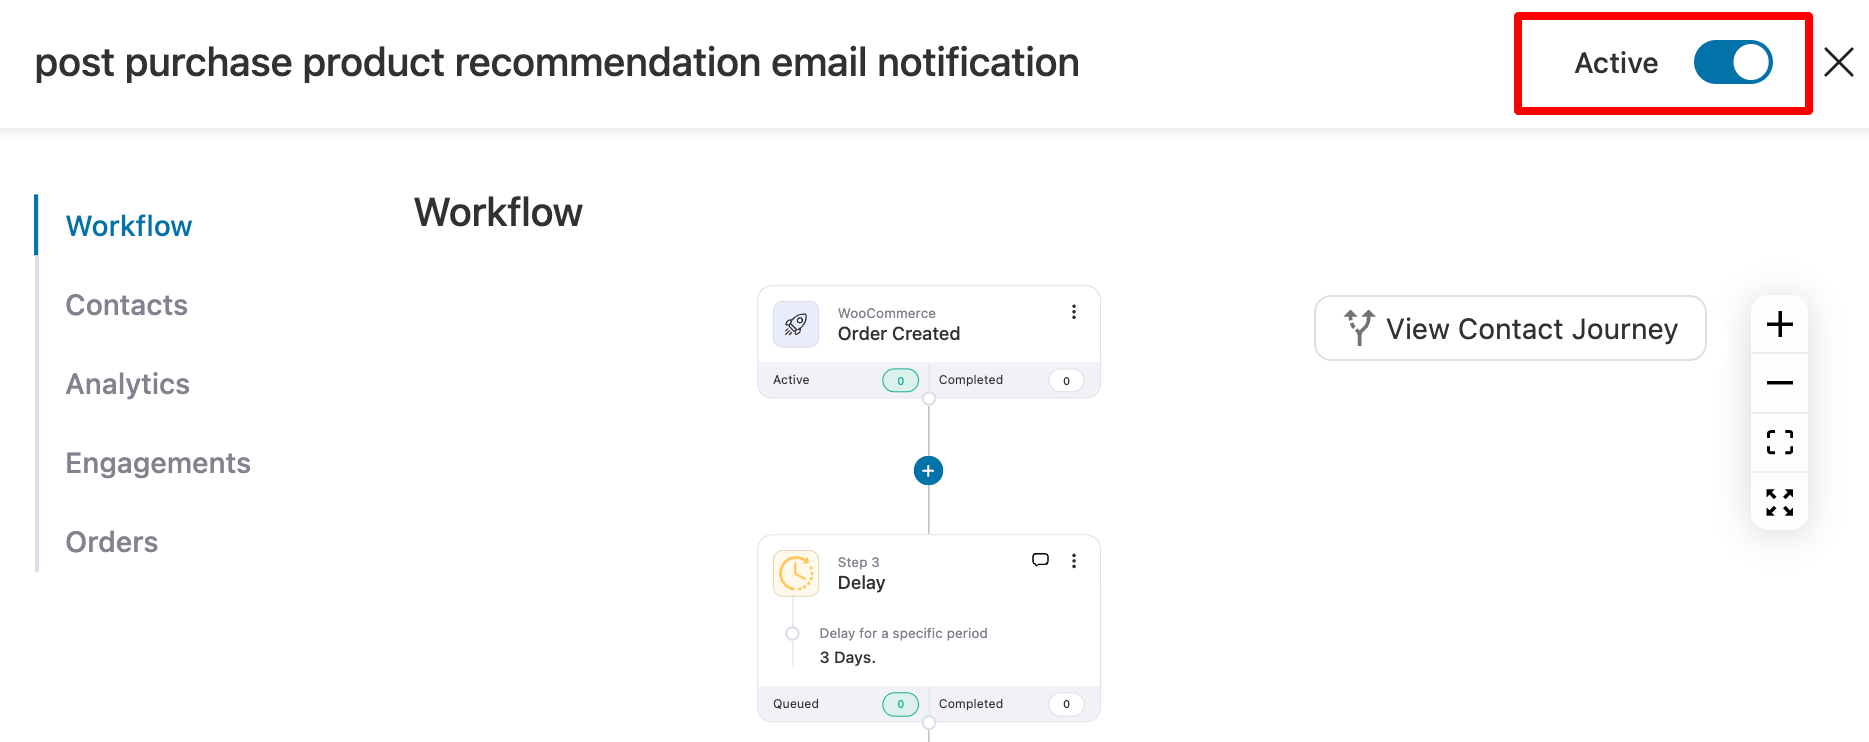 activate automation to send recommended products in email after order completion